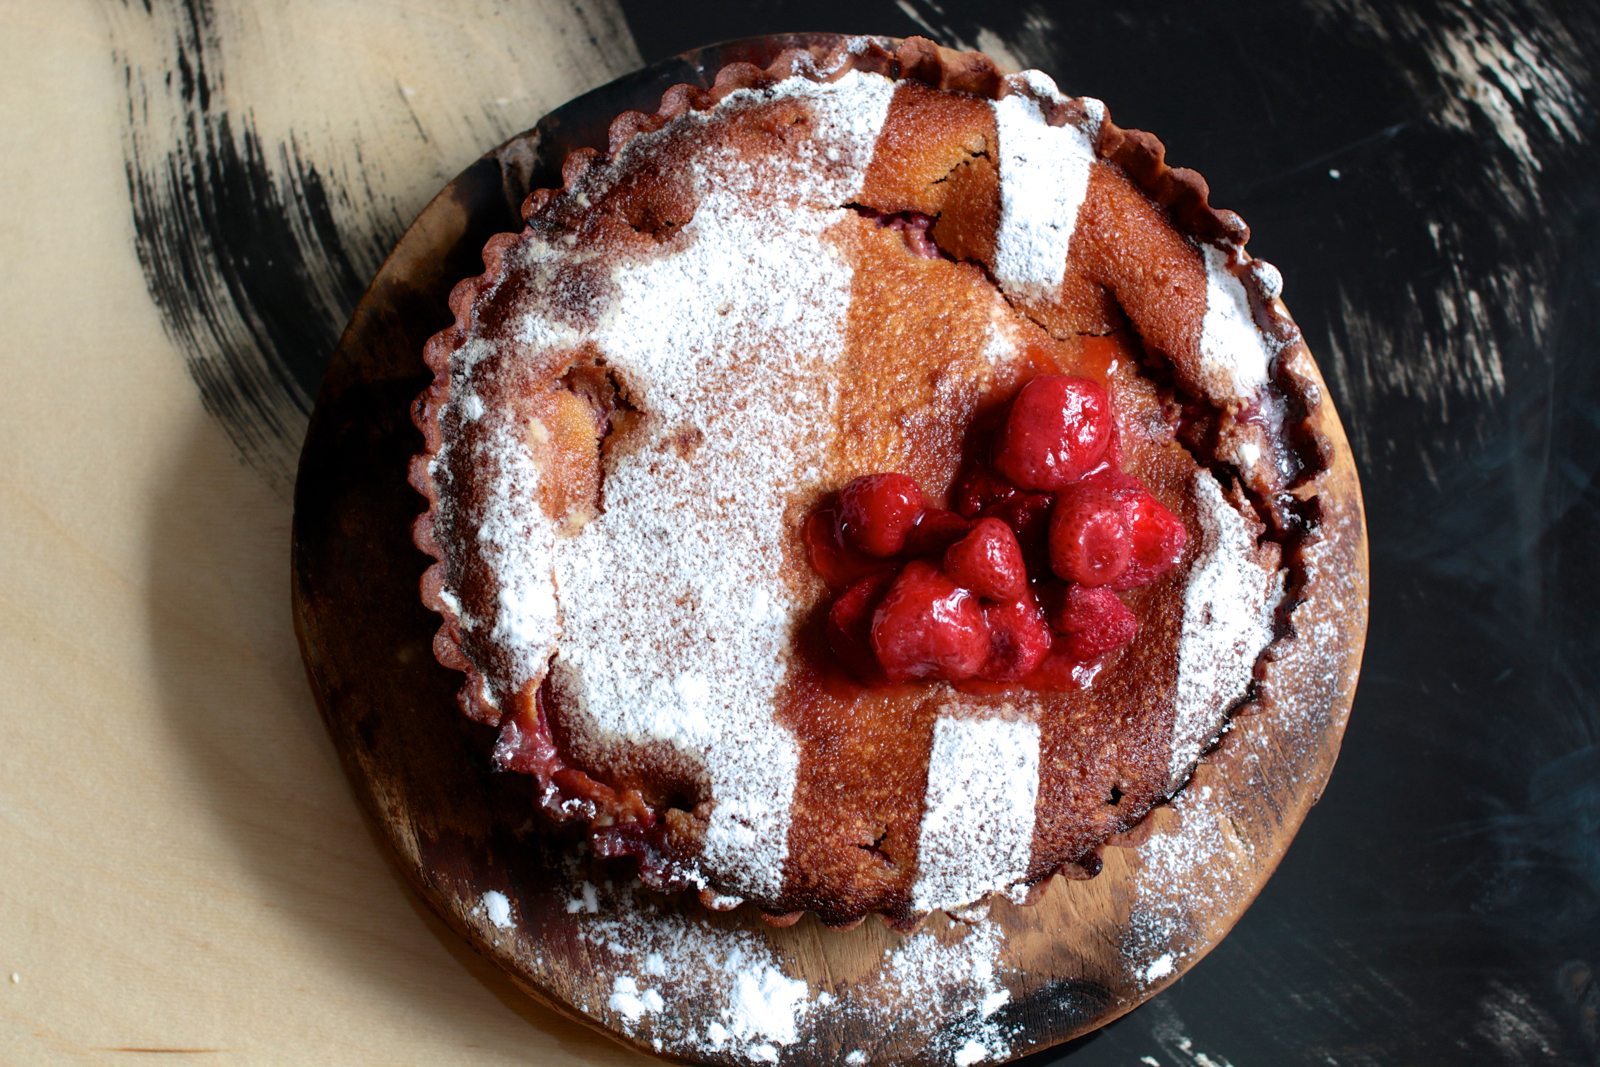 The same goes for this rhubarb and strawberry frangipane.